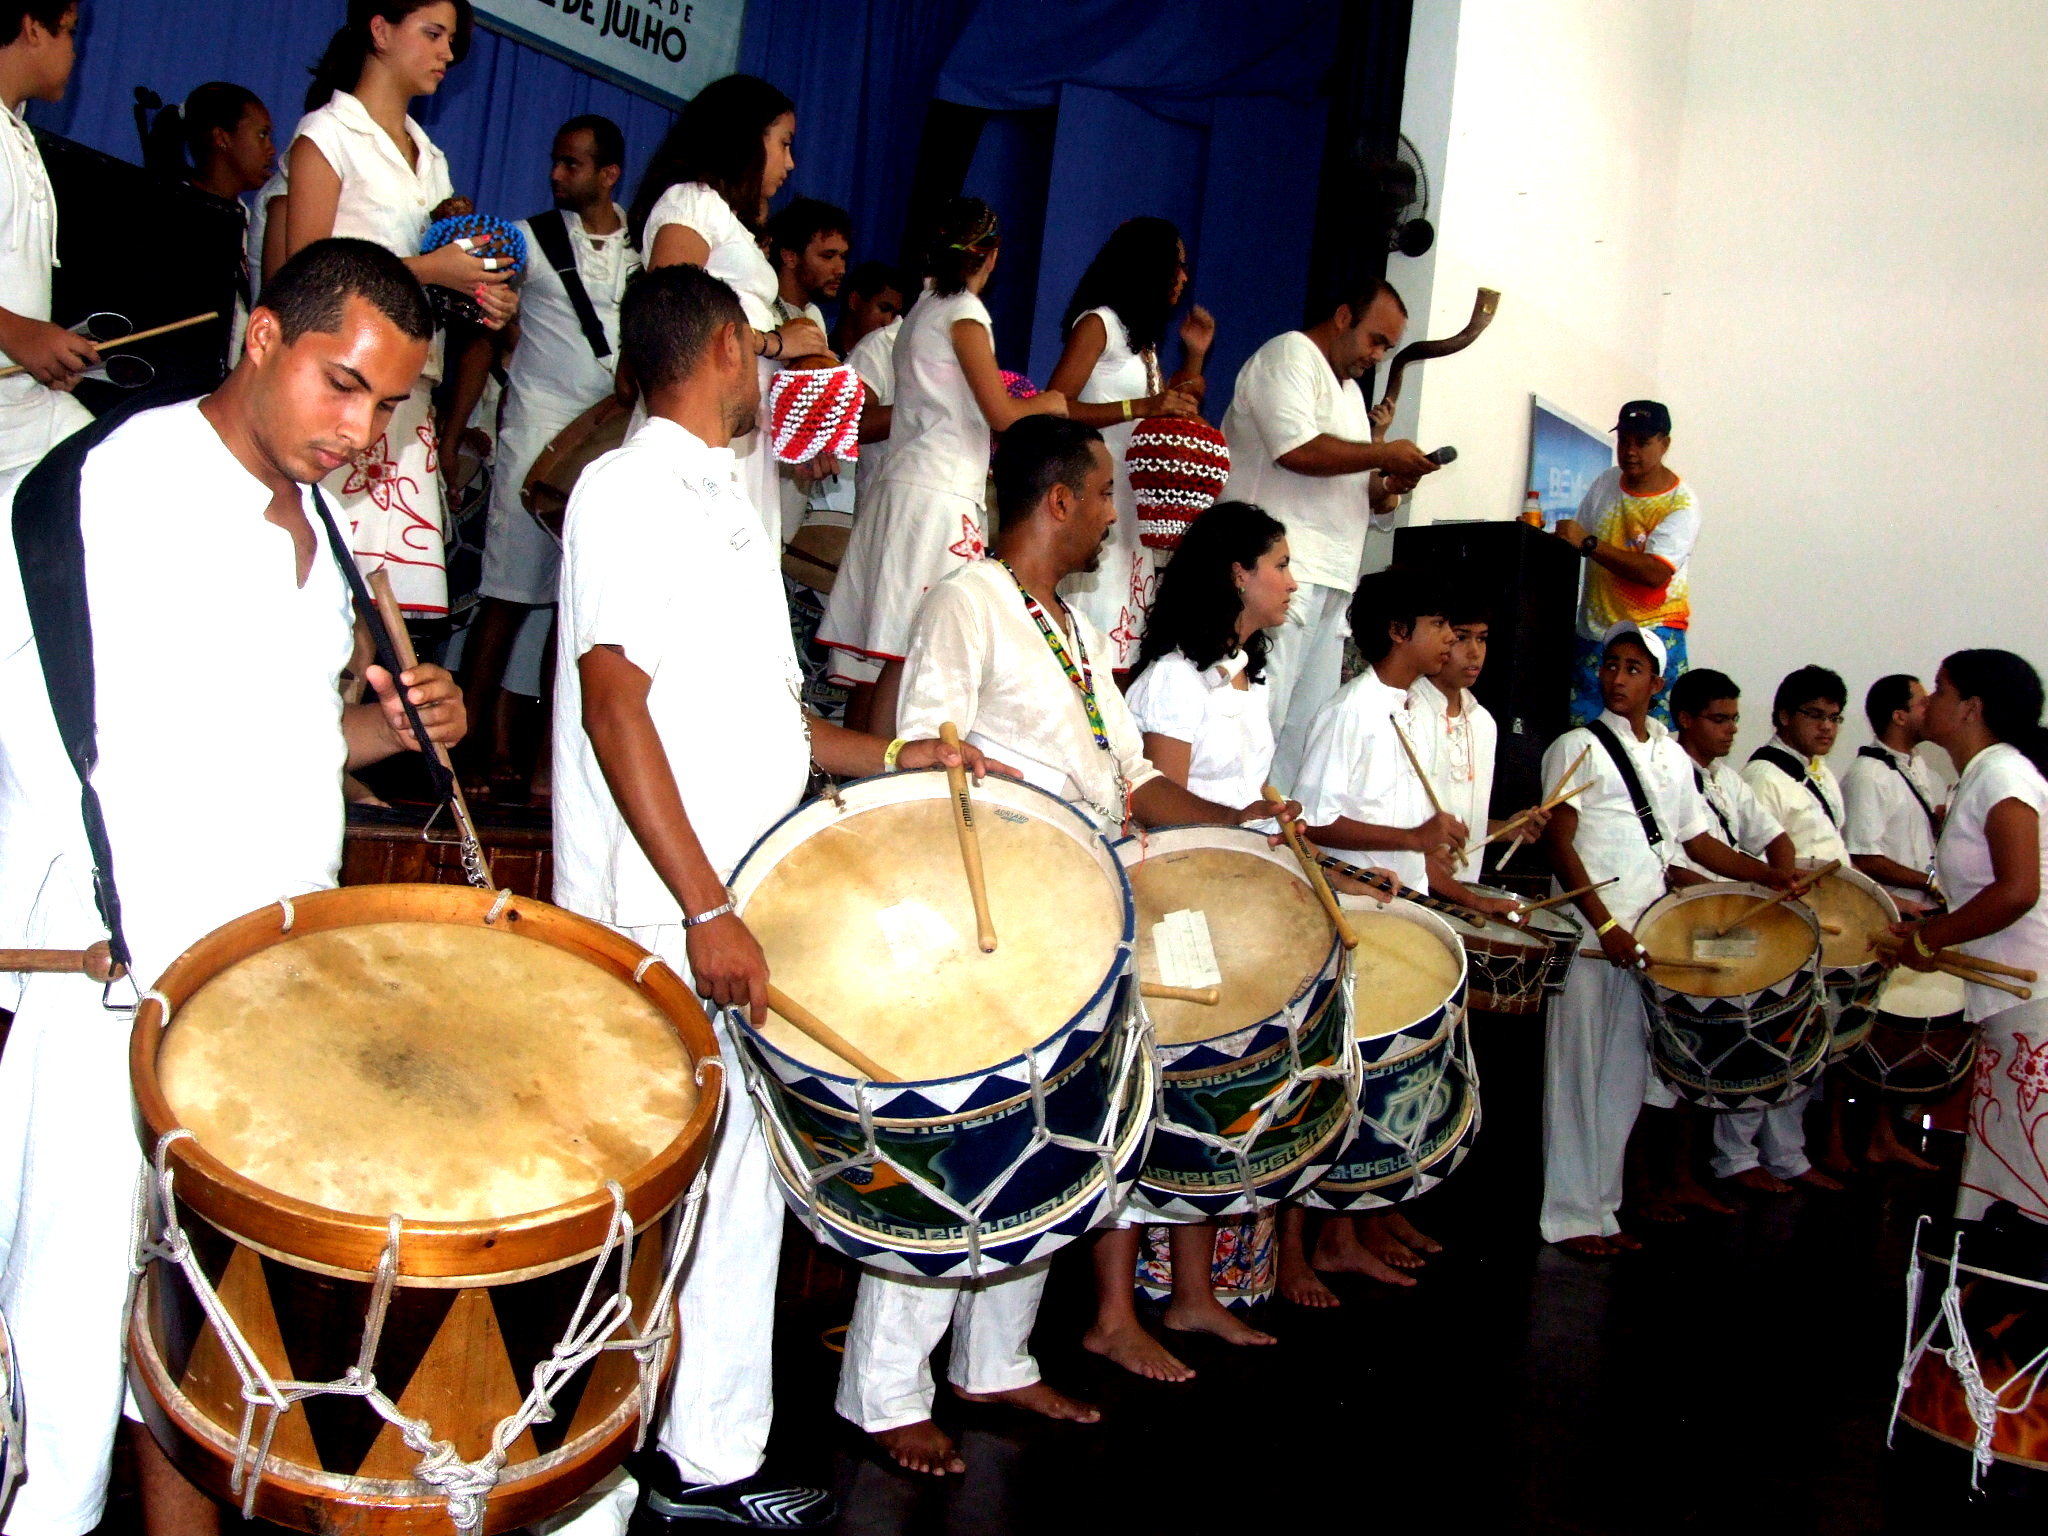 a group of people holding drums and standing next to each other